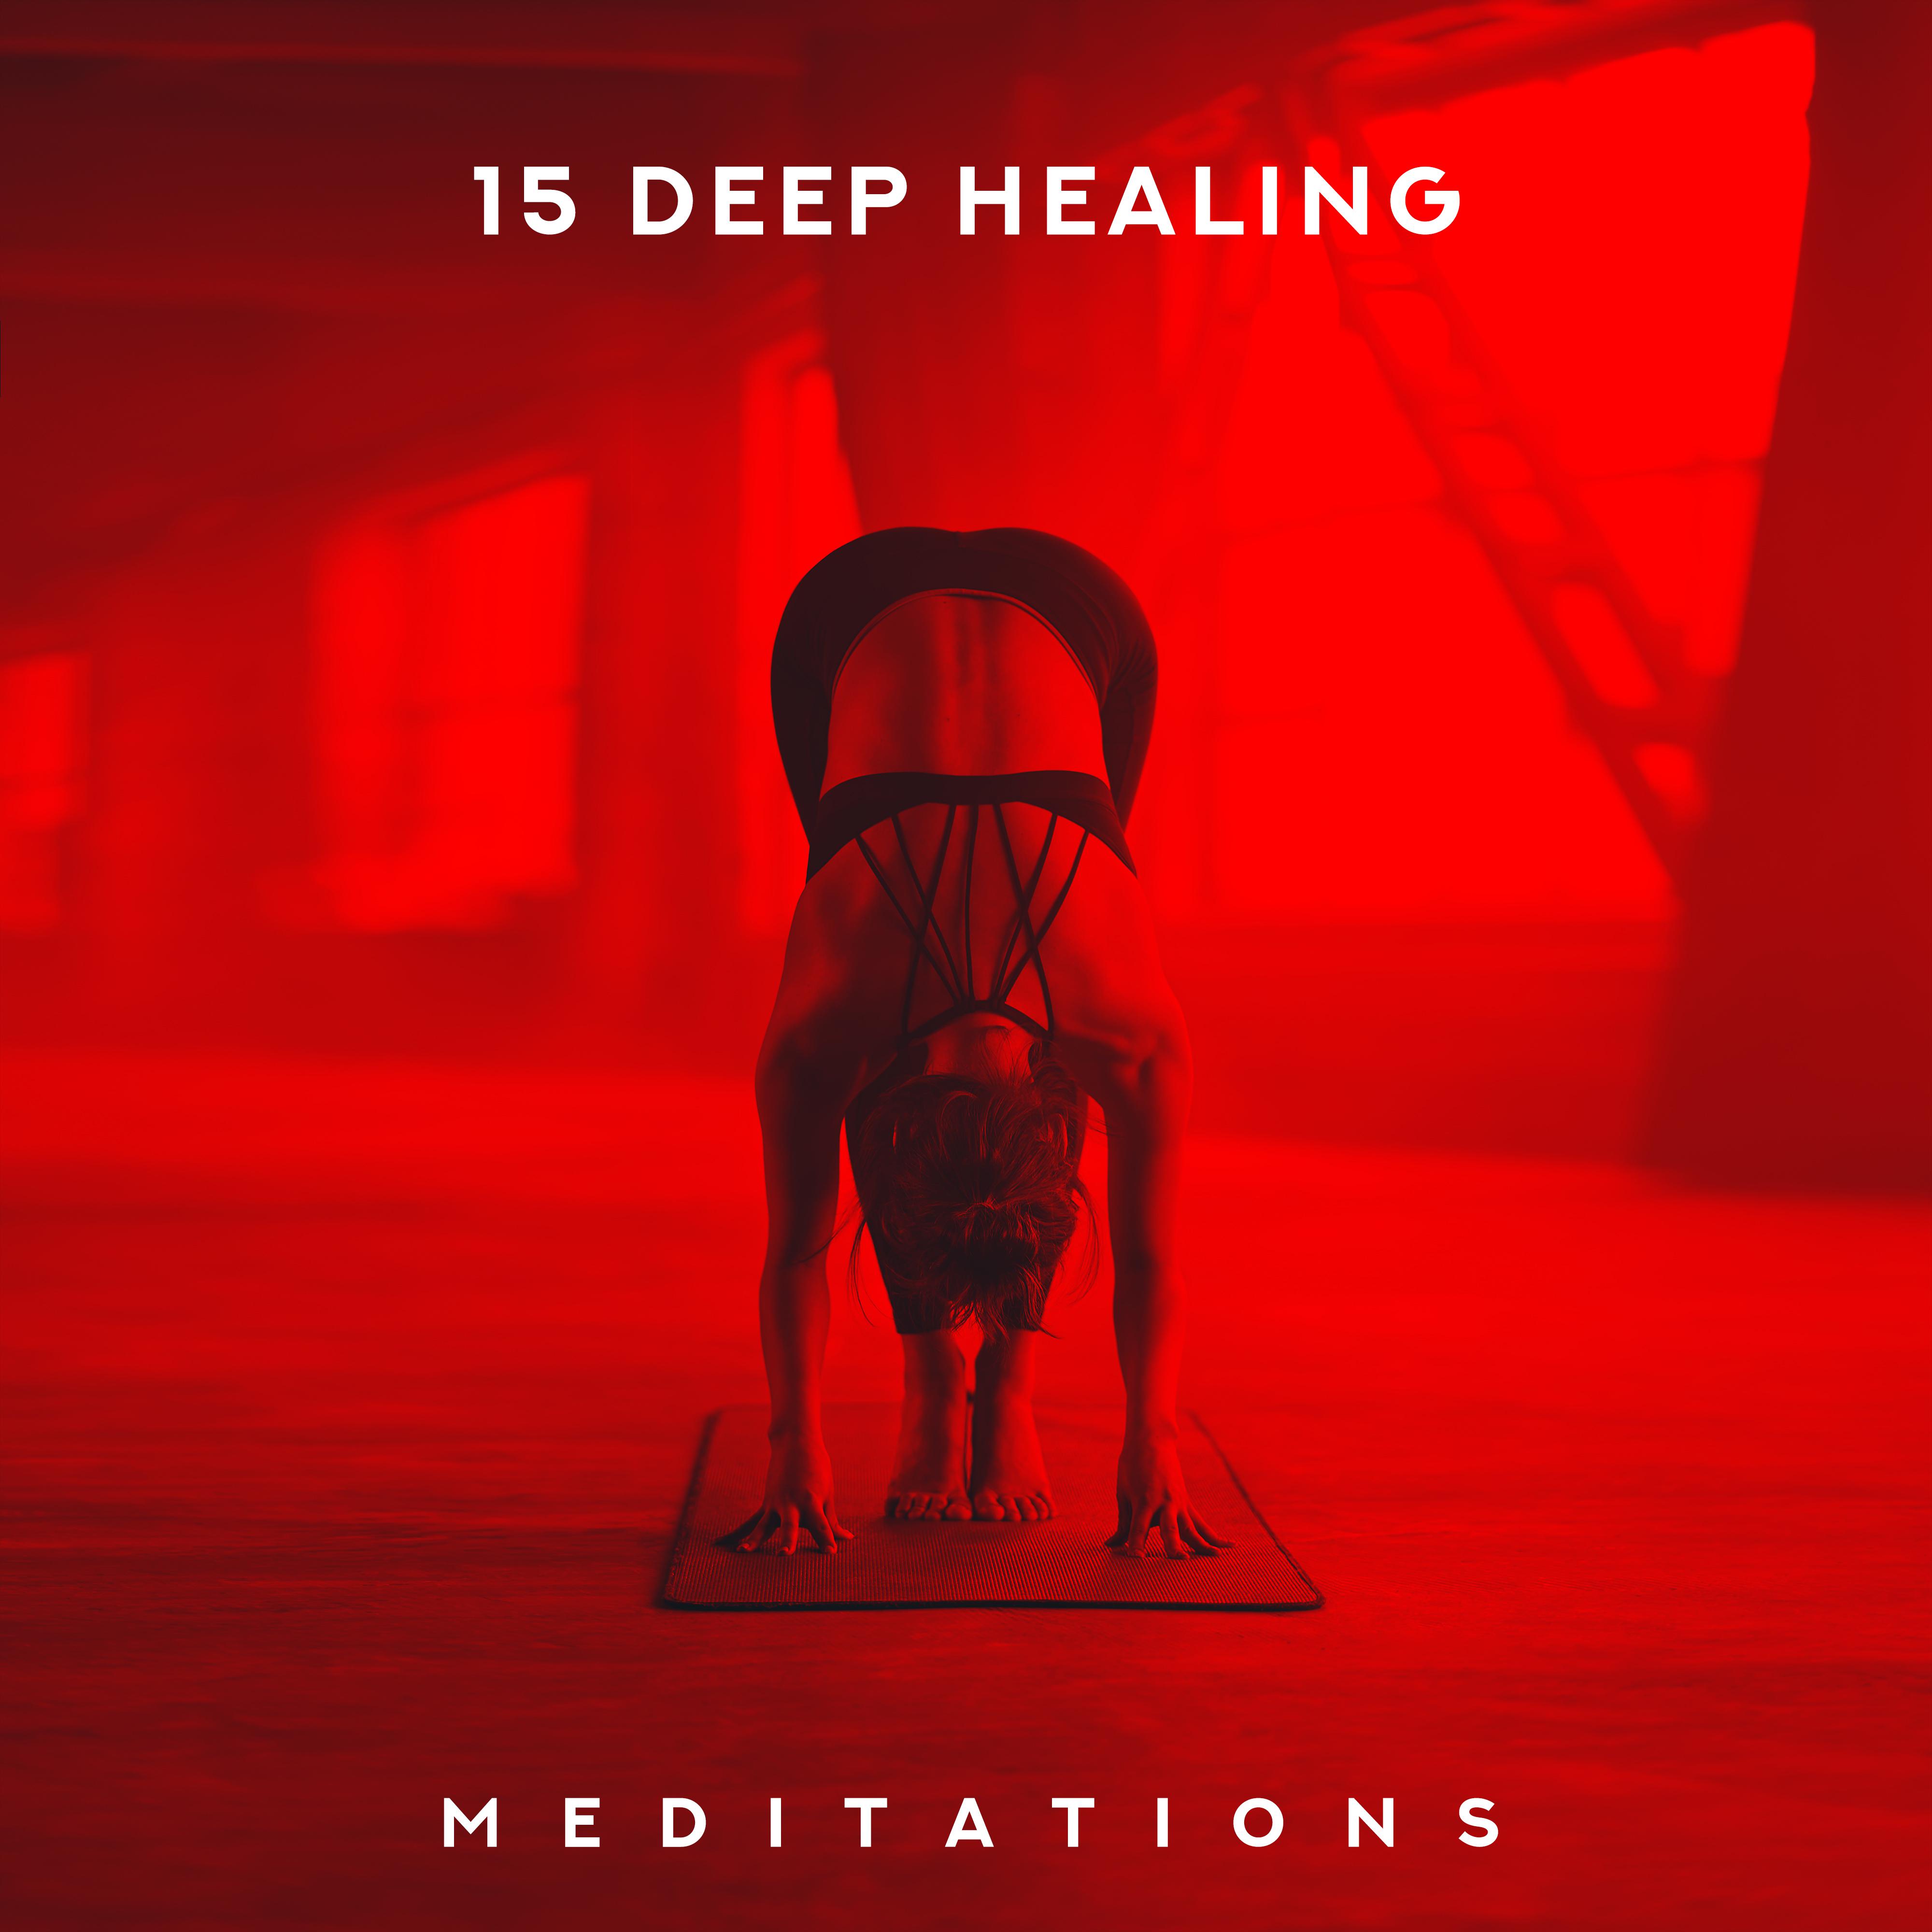 15 Deep Healing Meditations: 2019 New Age Ambient Music for Yoga Poses Training & Full Body Relaxation, Vital Energy Increase, Chakra Healing